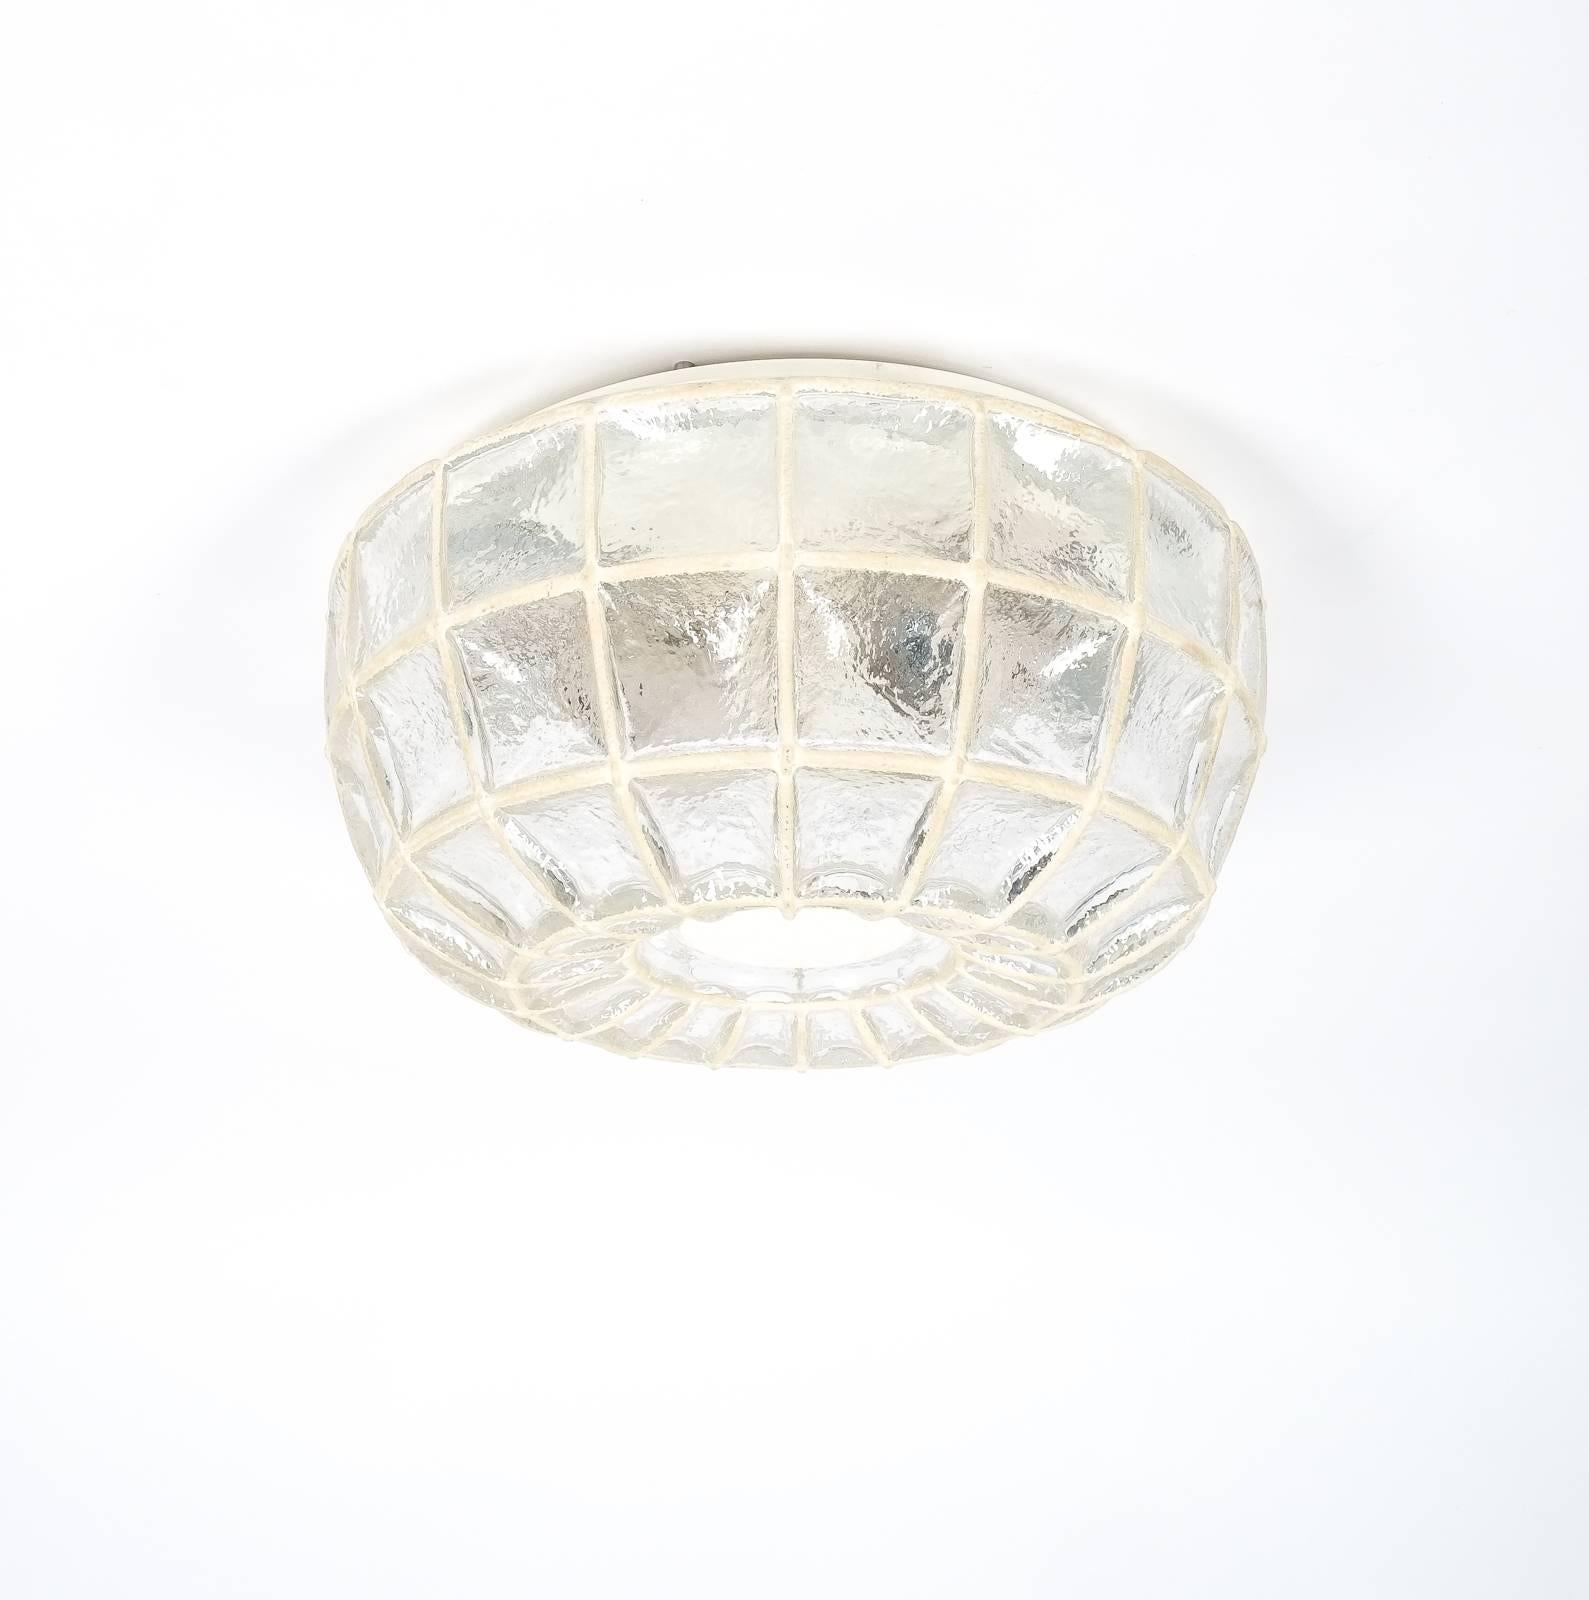 Beautiful 'iron' and glass honeycomb ceiling fixture by Limburg, Germany. This light features a thick clear glass with white grid elements. It holds two large bulbs with 60W each. The condition is excellent, it has been newly rewired (110-220V). We